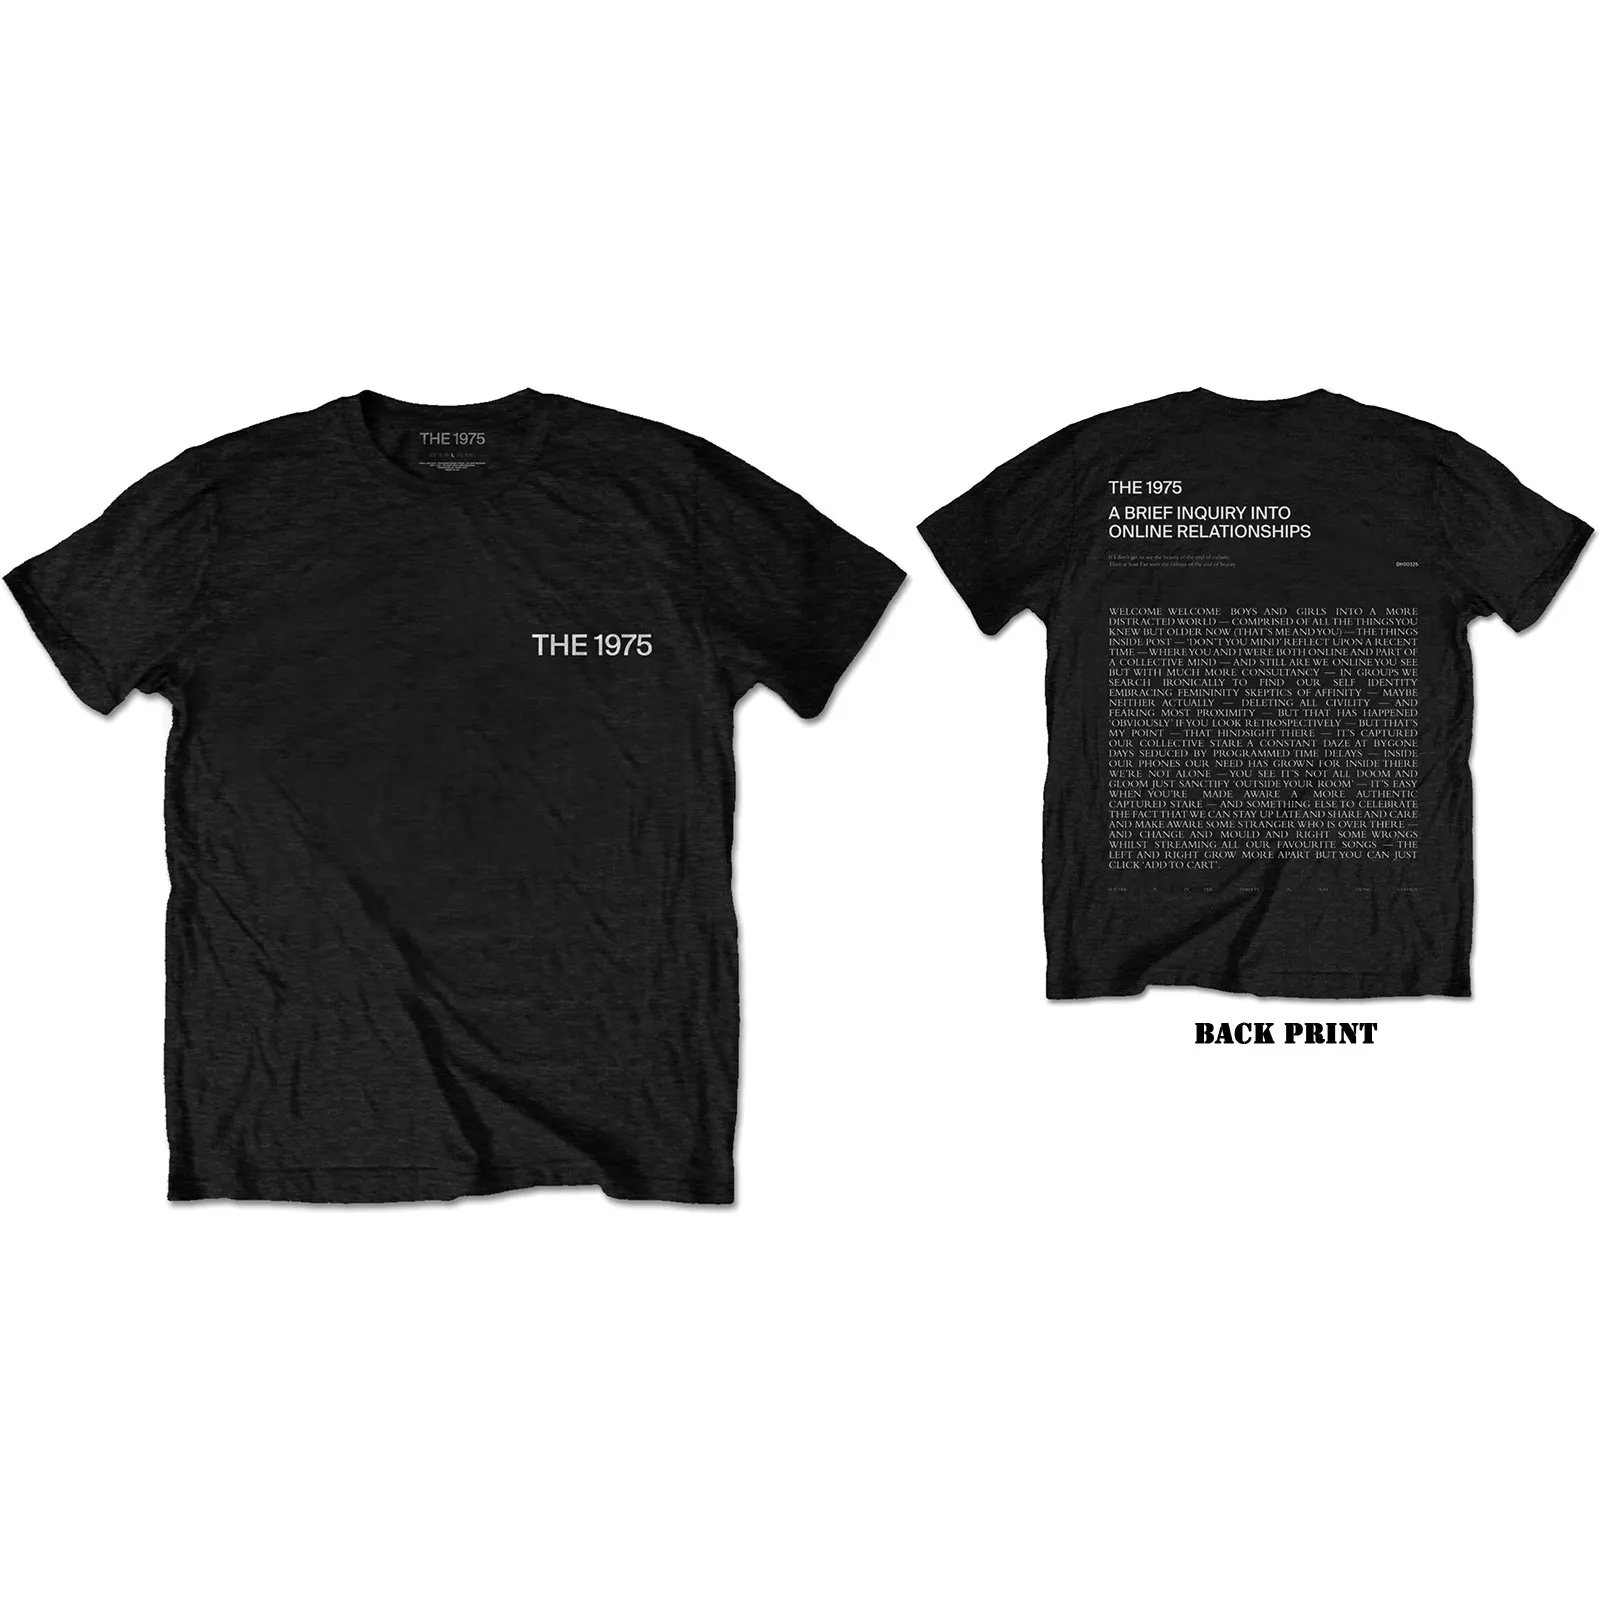 The 1975 - Unisex T-Shirt ABIIOR Welcome Welcome Version 2. Back Print artwork